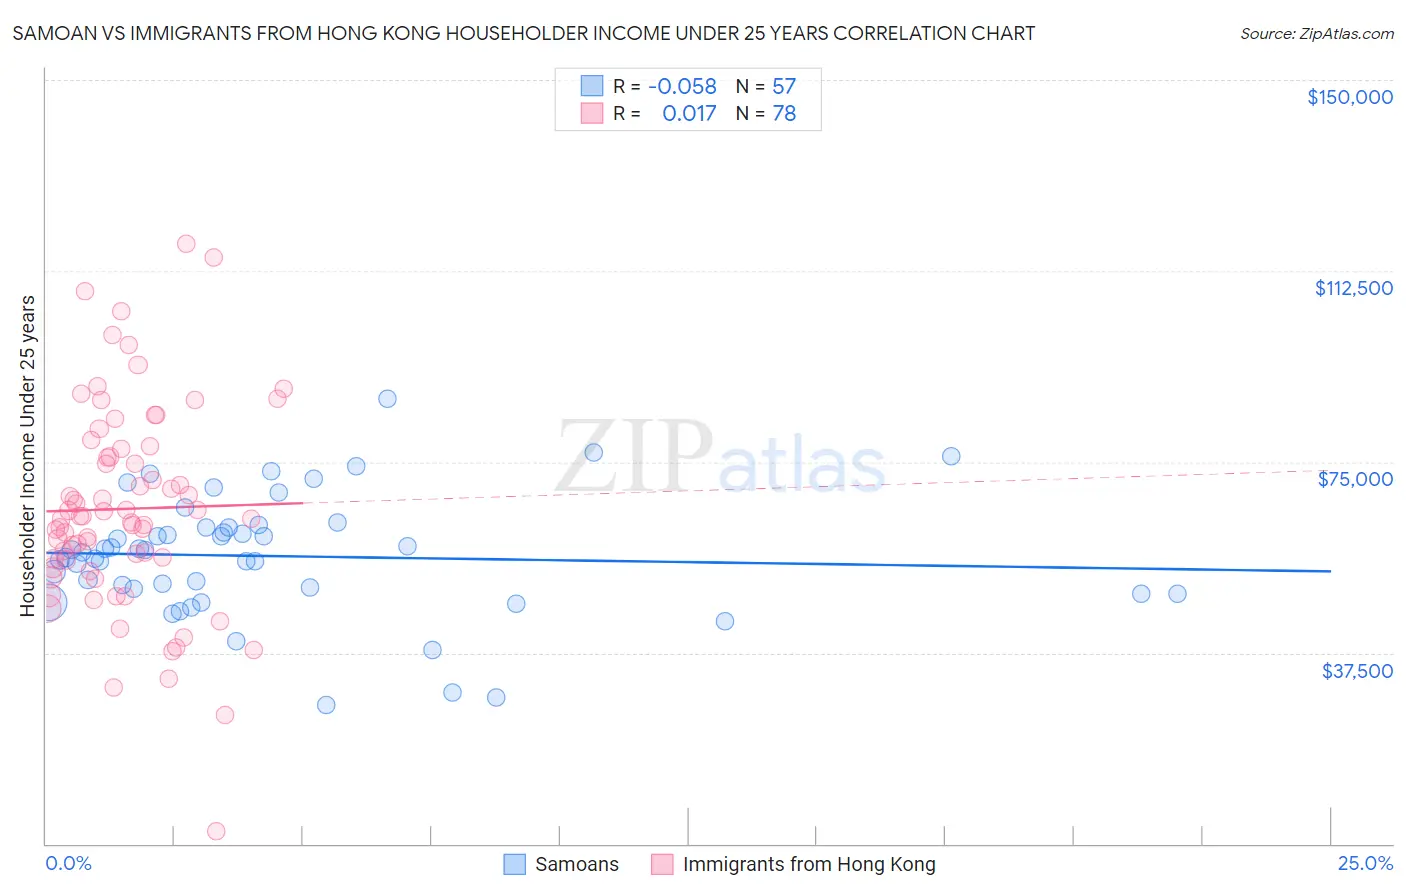 Samoan vs Immigrants from Hong Kong Householder Income Under 25 years